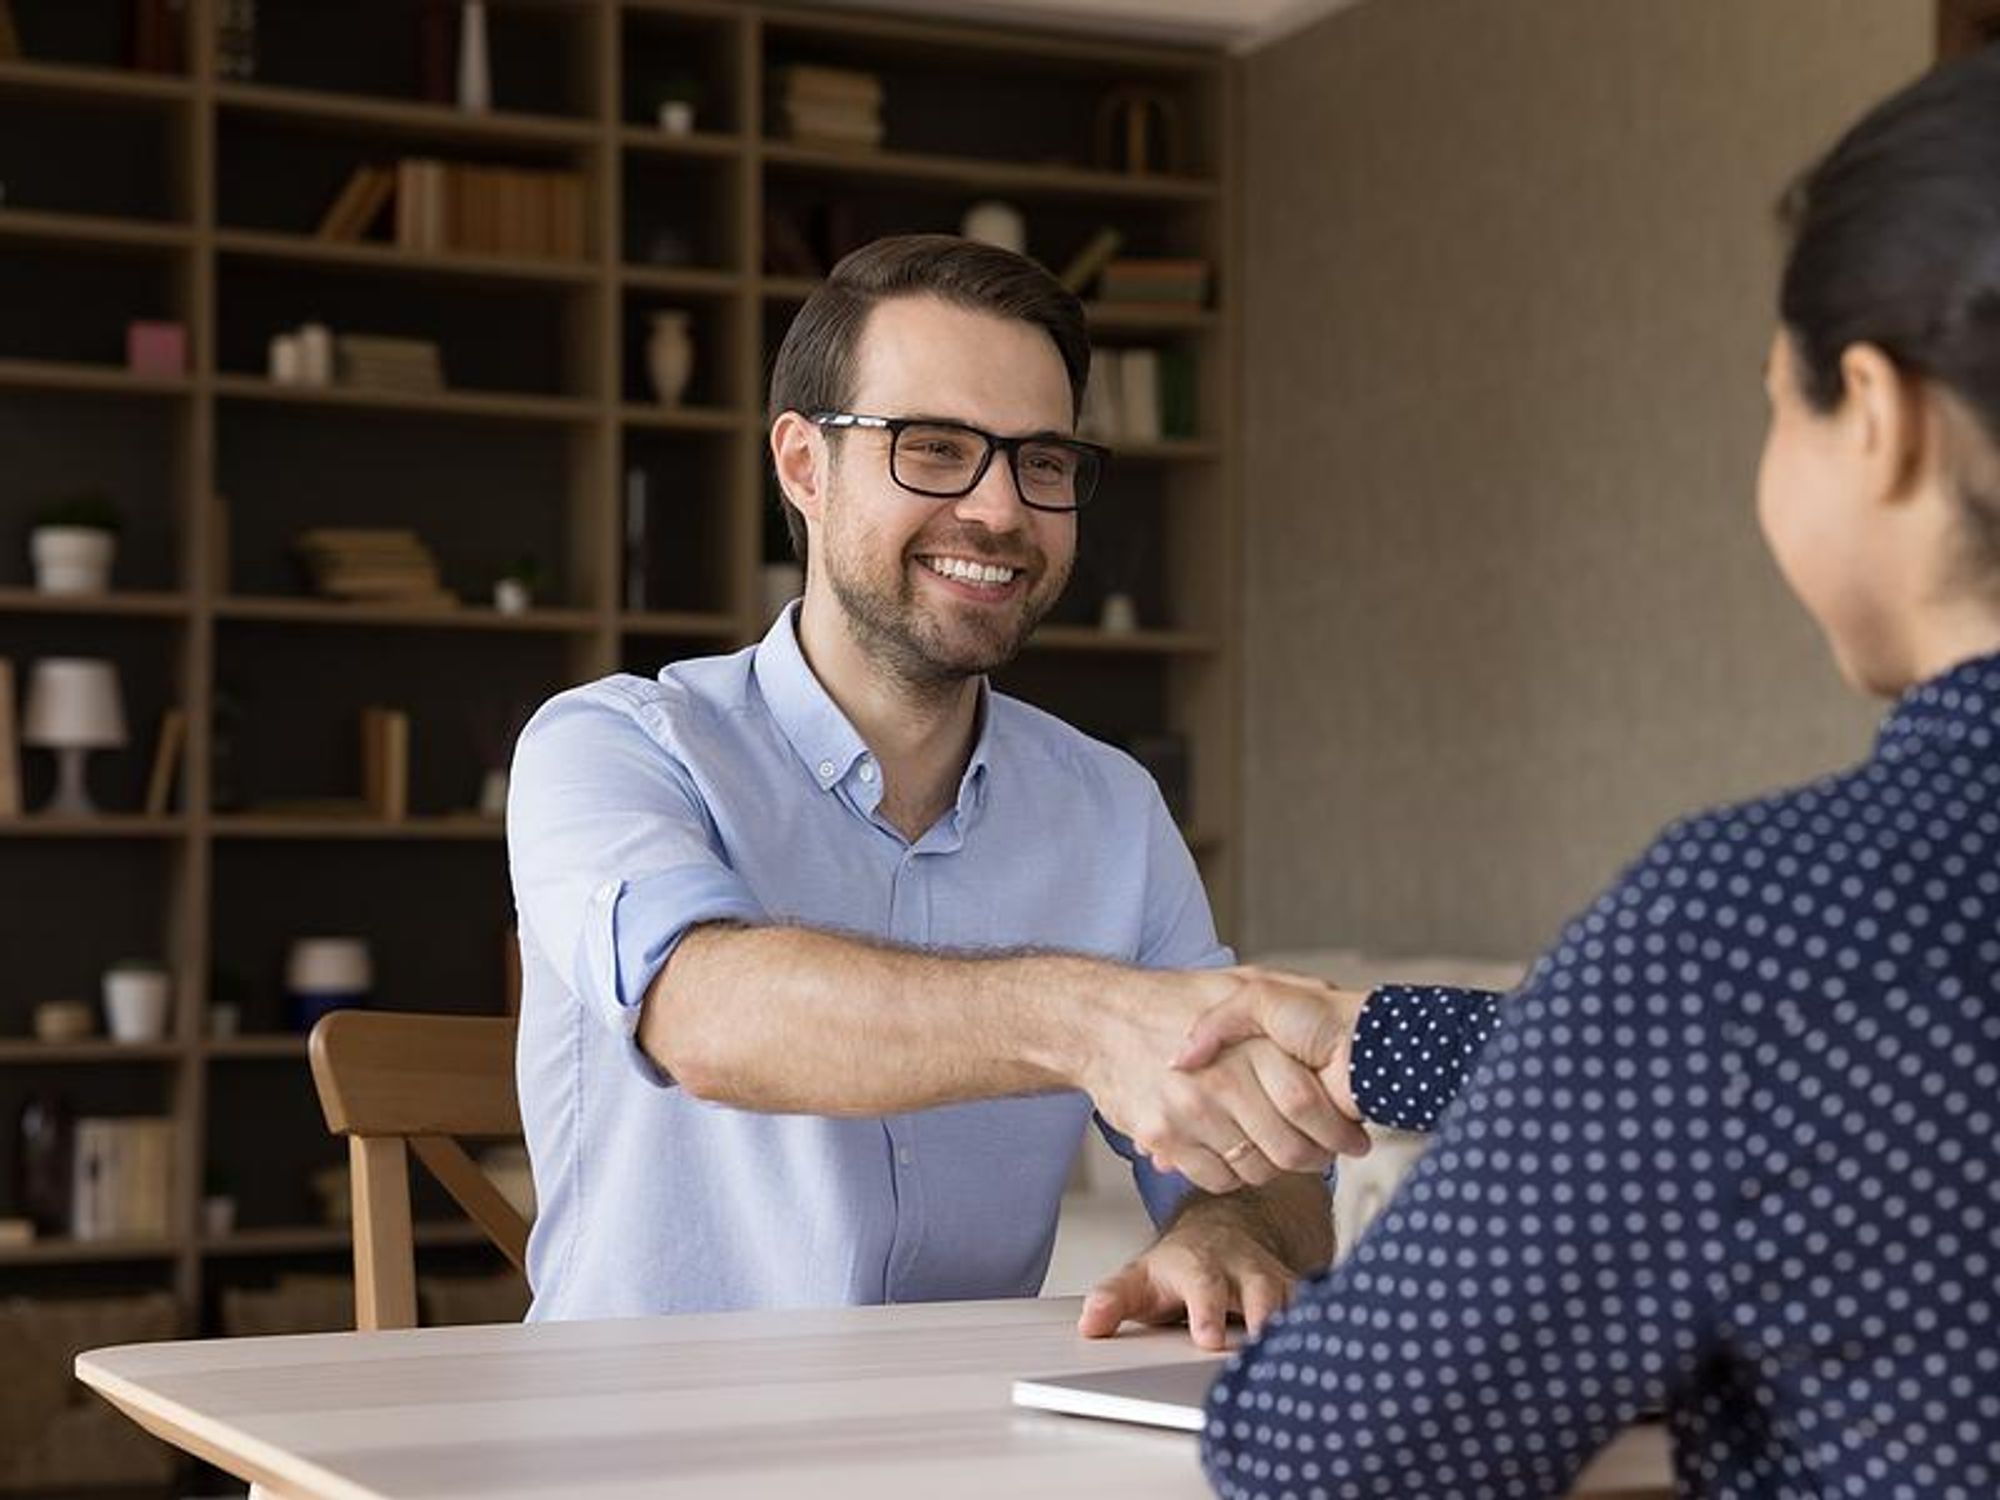 Man shakes the hiring manager's hand before a job interview